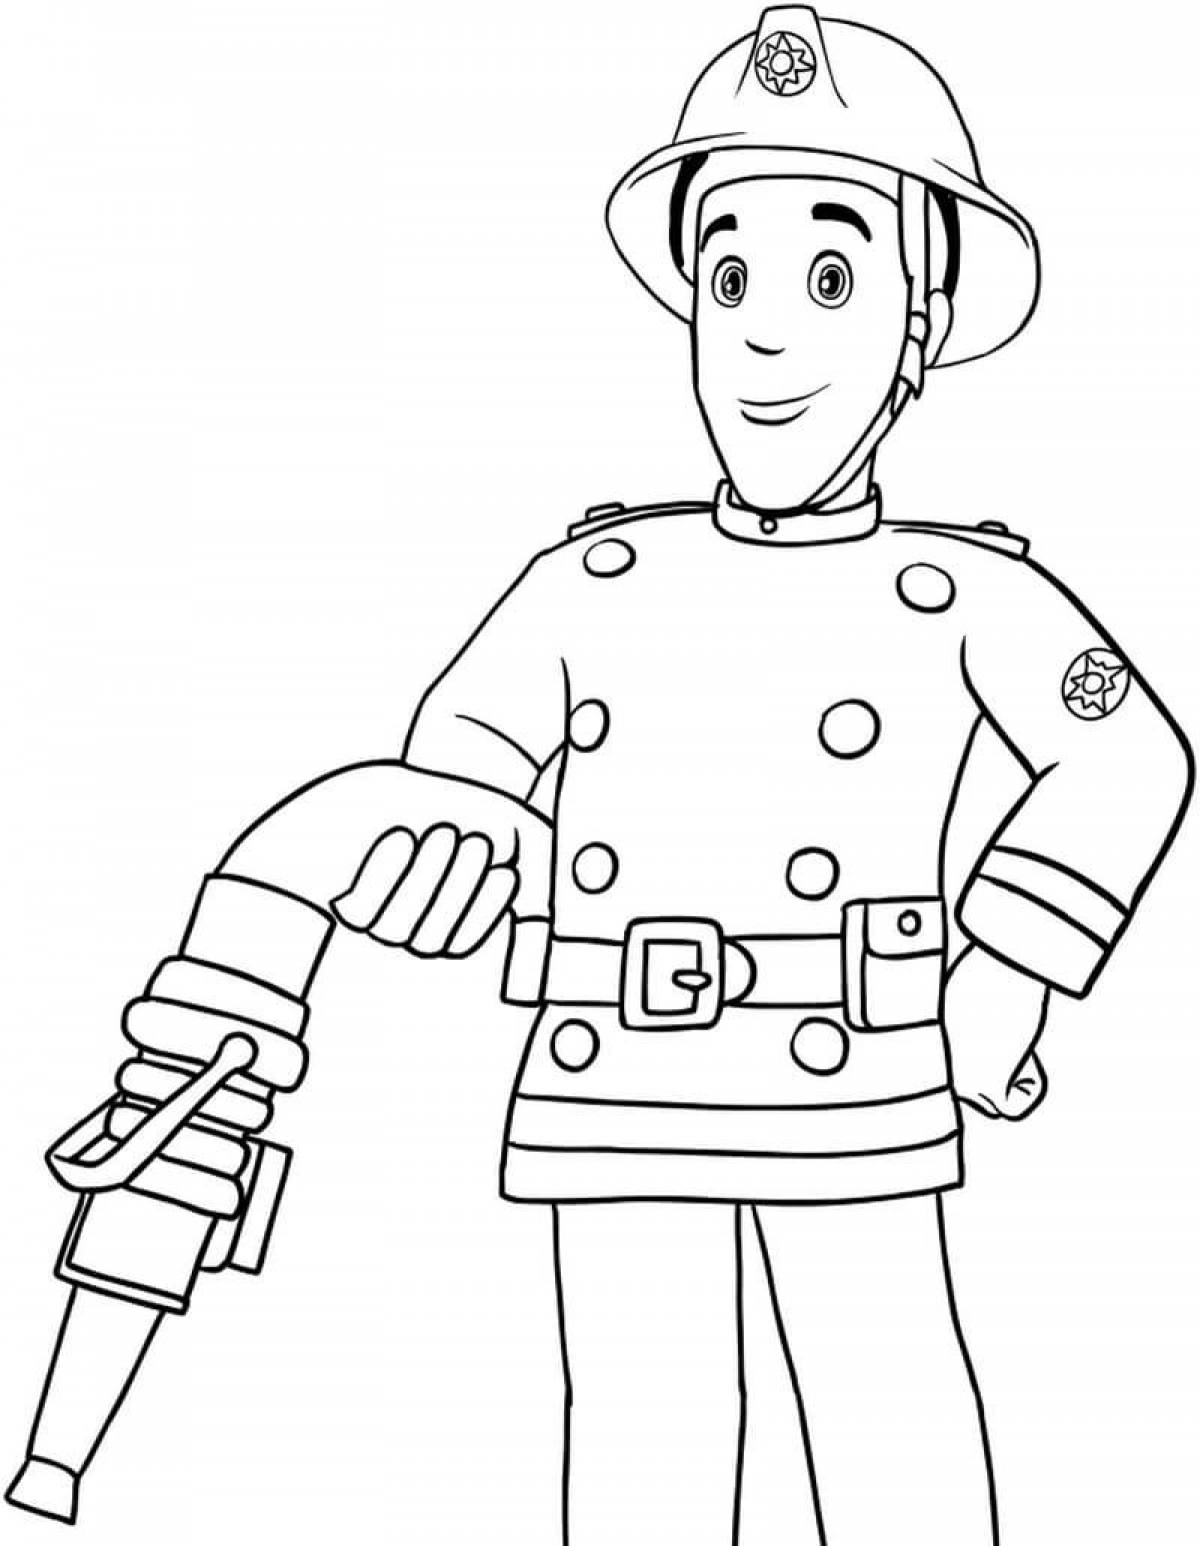 Unique firefighter coloring book for kids